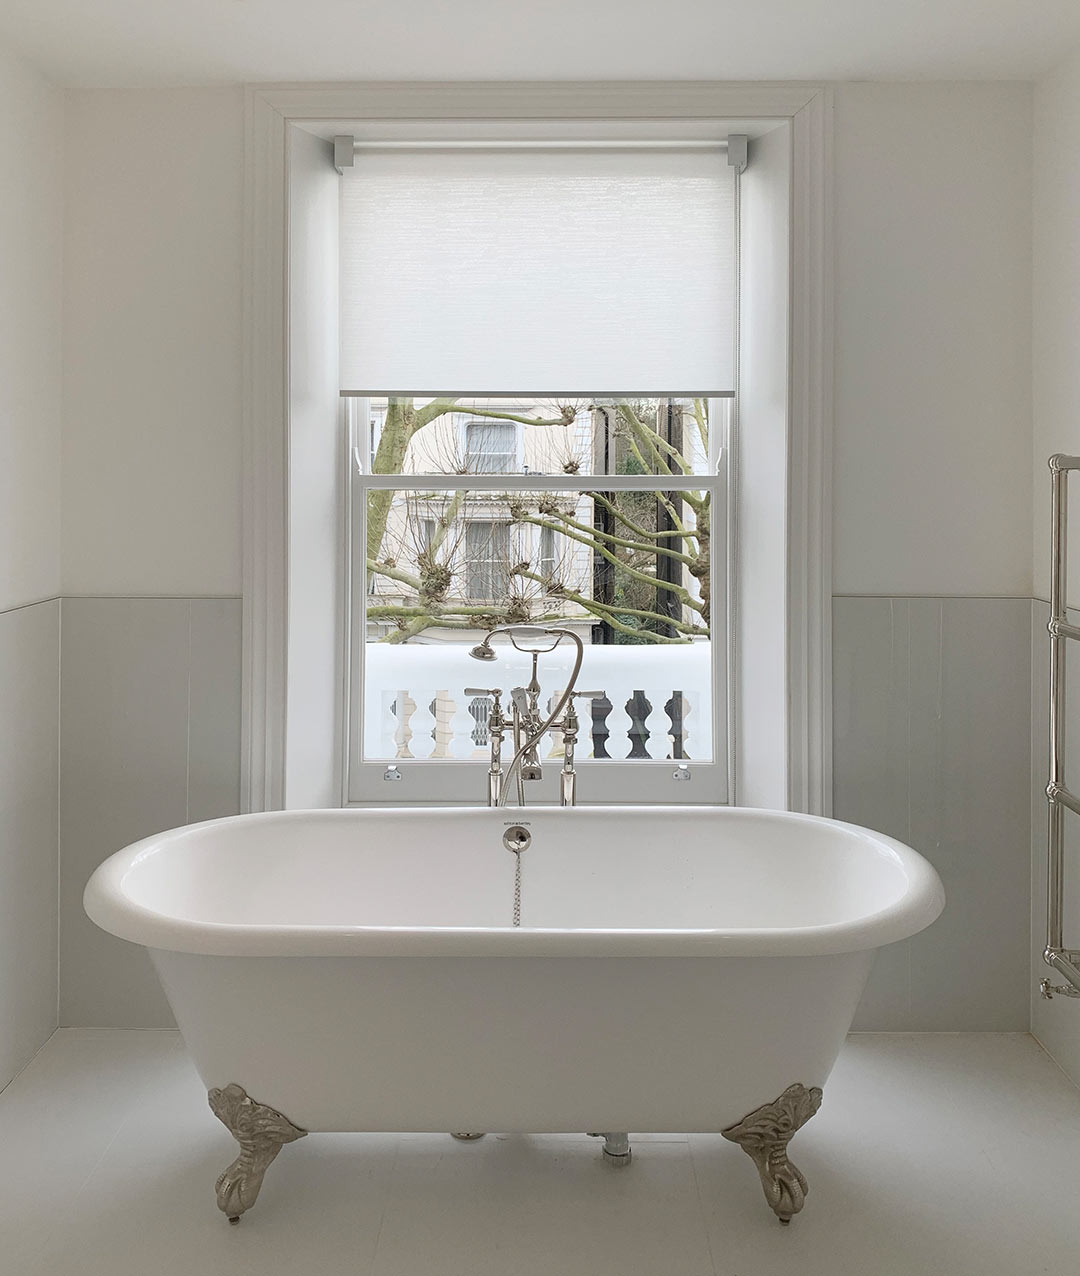 Contemporary roller blind for luxury bathroom in white